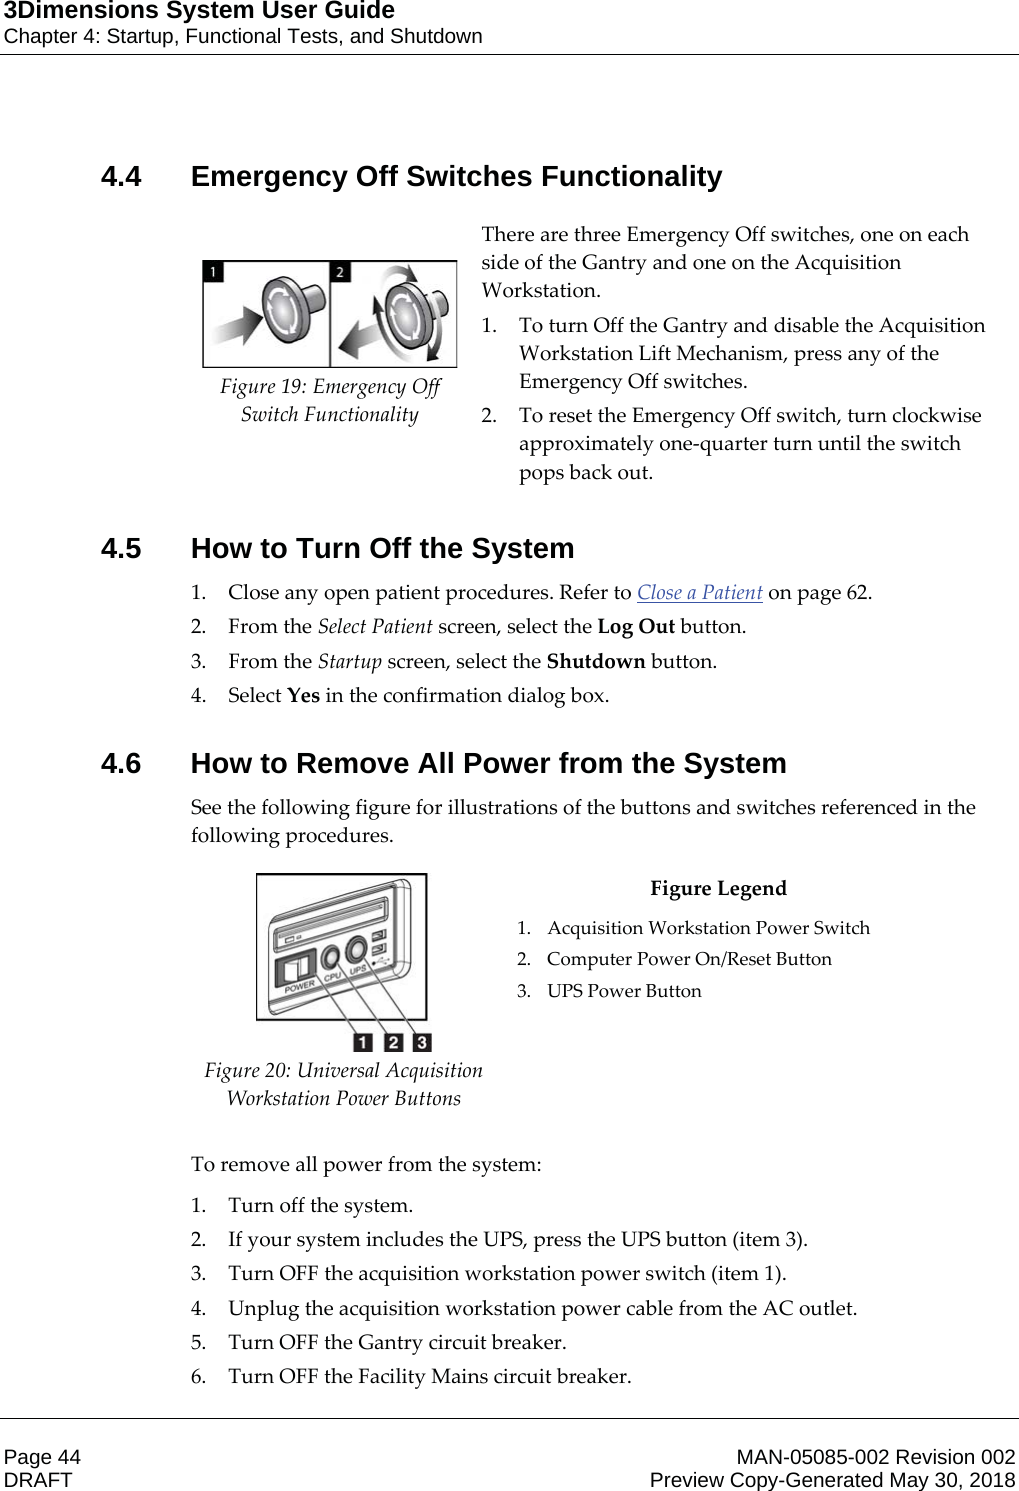 3Dimensions System User GuideChapter 4: Startup, Functional Tests, and ShutdownPage 44 MAN-05085-002 Revision 002  DRAFT Preview Copy-Generated May 30, 20184.4 Emergency Off Switches Functionality     Figure 19: Emergency Off Switch Functionality There are three Emergency Off switches, one on each side of the Gantry and one on the Acquisition Workstation.  1. To turn Off the Gantry and disable the Acquisition Workstation Lift Mechanism, press any of the Emergency Off switches. 2. To reset the Emergency Off switch, turn clockwise approximately one-quarter turn until the switch pops back out.    4.5 How to Turn Off the System1. Close any open patient procedures. Refer to Close a Patient on page 62. 2. From the Select Patient screen, select the Log Out button. 3. From the Startup screen, select the Shutdown button. 4. Select Yes in the confirmation dialog box. 4.6 How to Remove All Power from the SystemSee the following figure for illustrations of the buttons and switches referenced in the following procedures.  Figure 20: Universal Acquisition Workstation Power Buttons Figure Legend 1. Acquisition Workstation Power Switch 2. Computer Power On/Reset Button 3. UPS Power Button    To remove all power from the system: 1. Turn off the system. 2. If your system includes the UPS, press the UPS button (item 3). 3. Turn OFF the acquisition workstation power switch (item 1). 4. Unplug the acquisition workstation power cable from the AC outlet. 5. Turn OFF the Gantry circuit breaker. 6. Turn OFF the Facility Mains circuit breaker. 